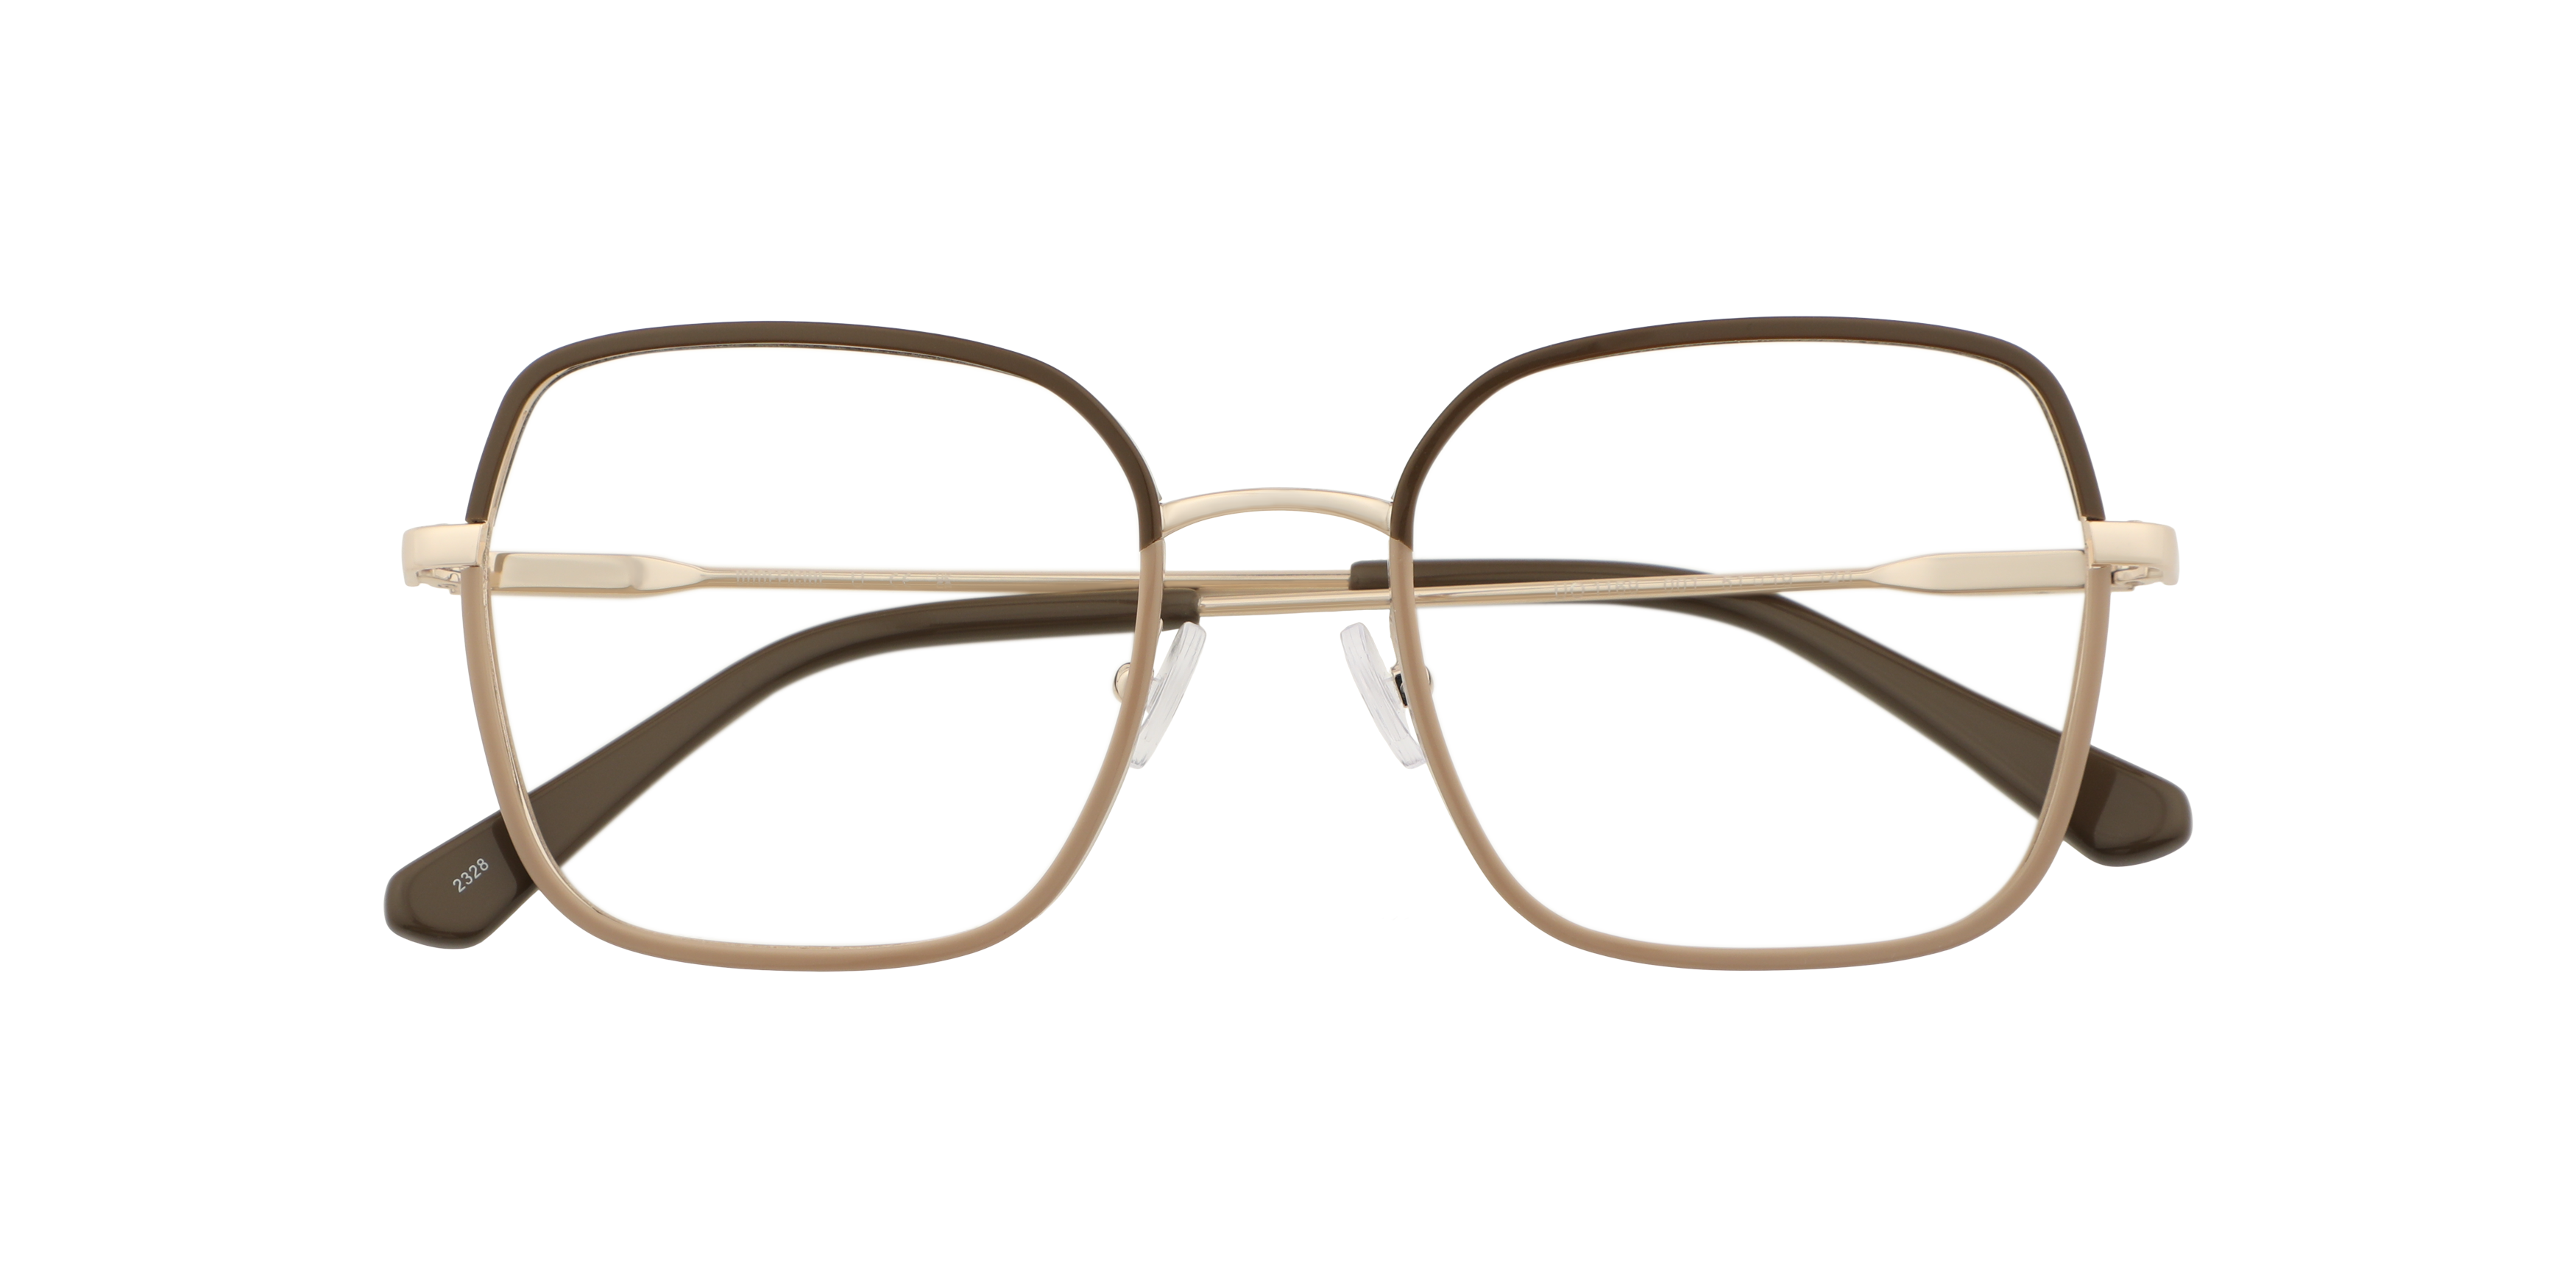 Folded Unofficial UO1169 Glasses Transparent / Gold